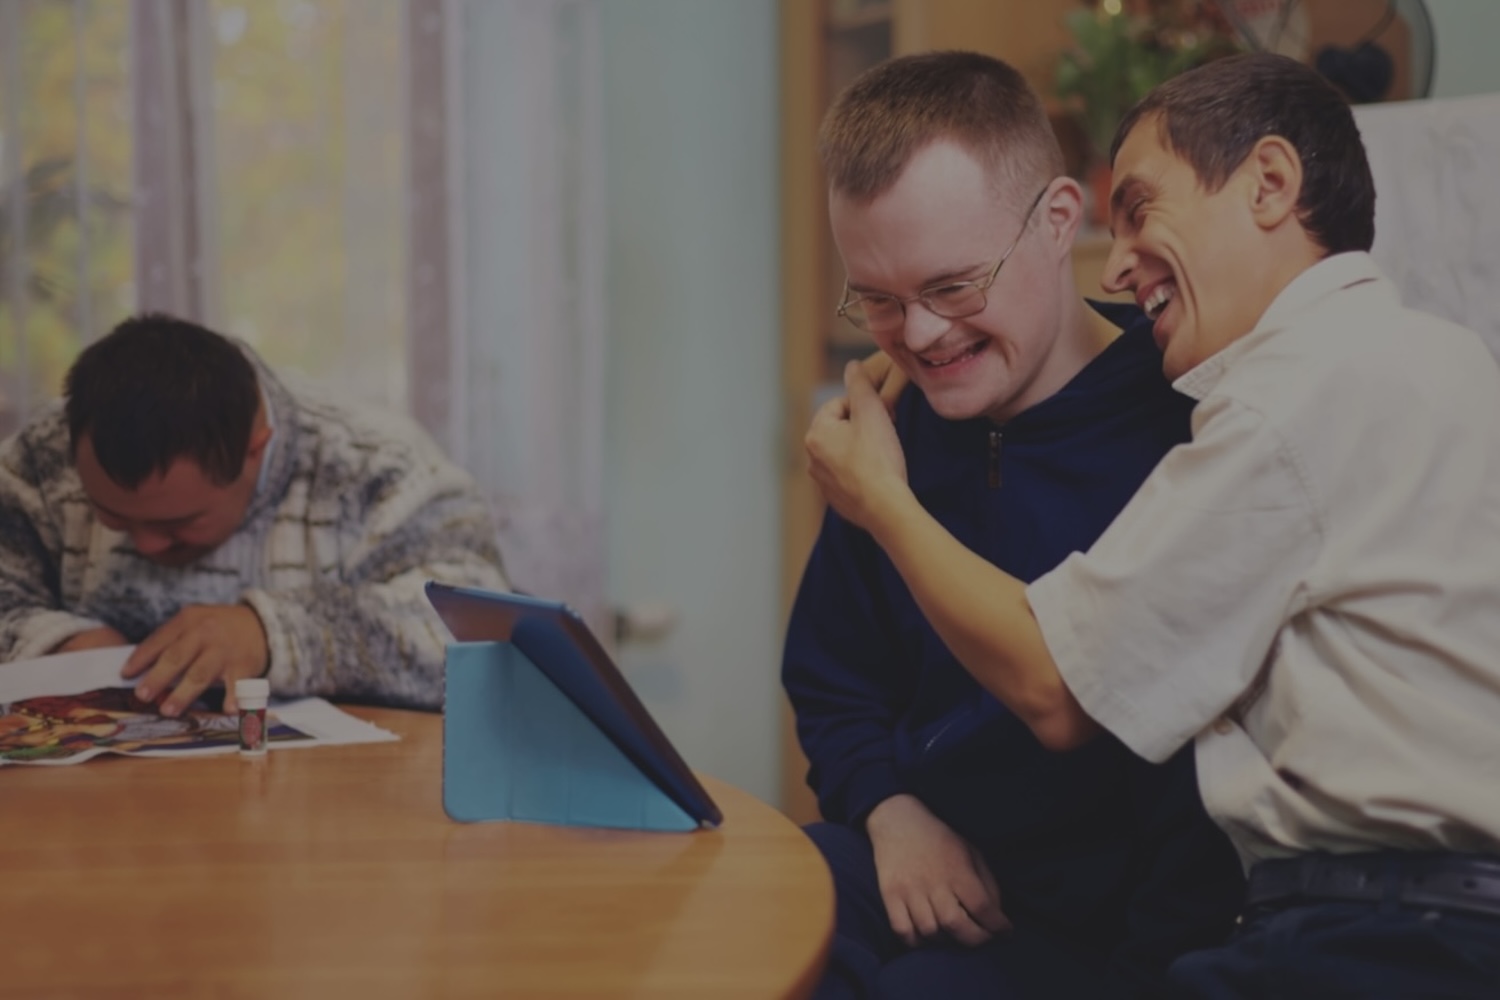 Two disabled men give each other a hug and laugh while viewing something on an iPad screen.